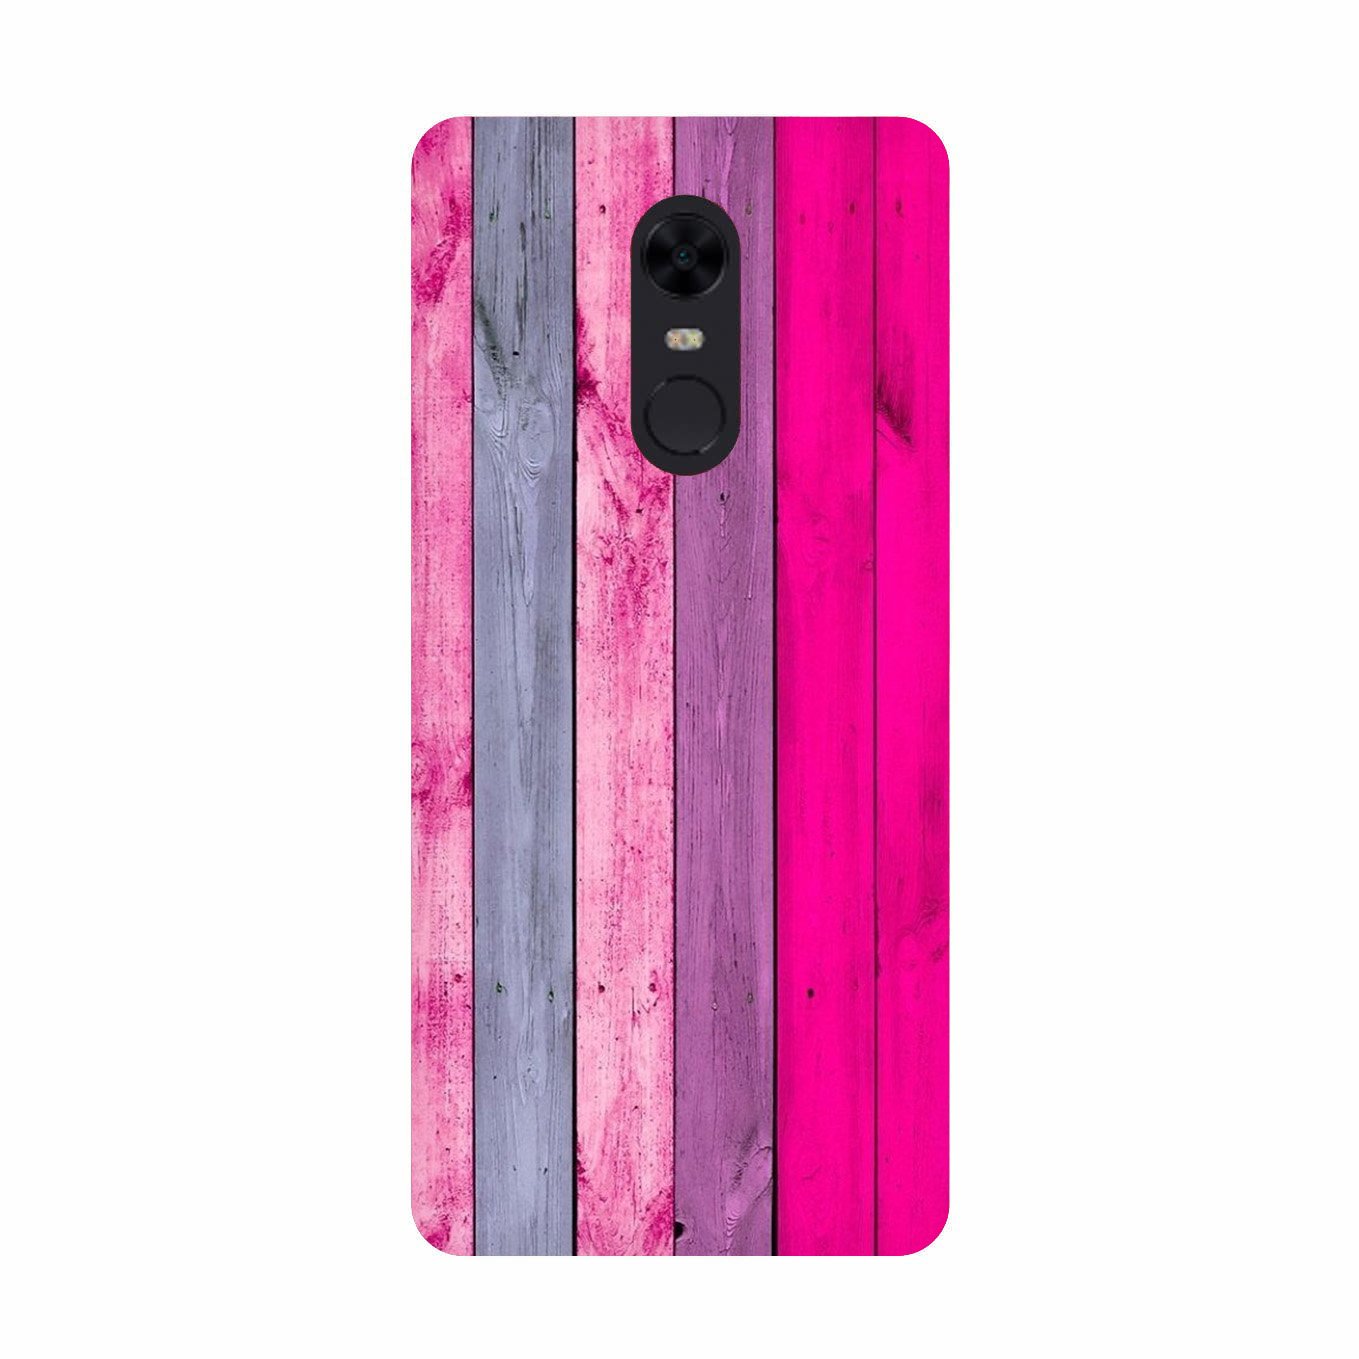 Wooden look Case for Redmi 5